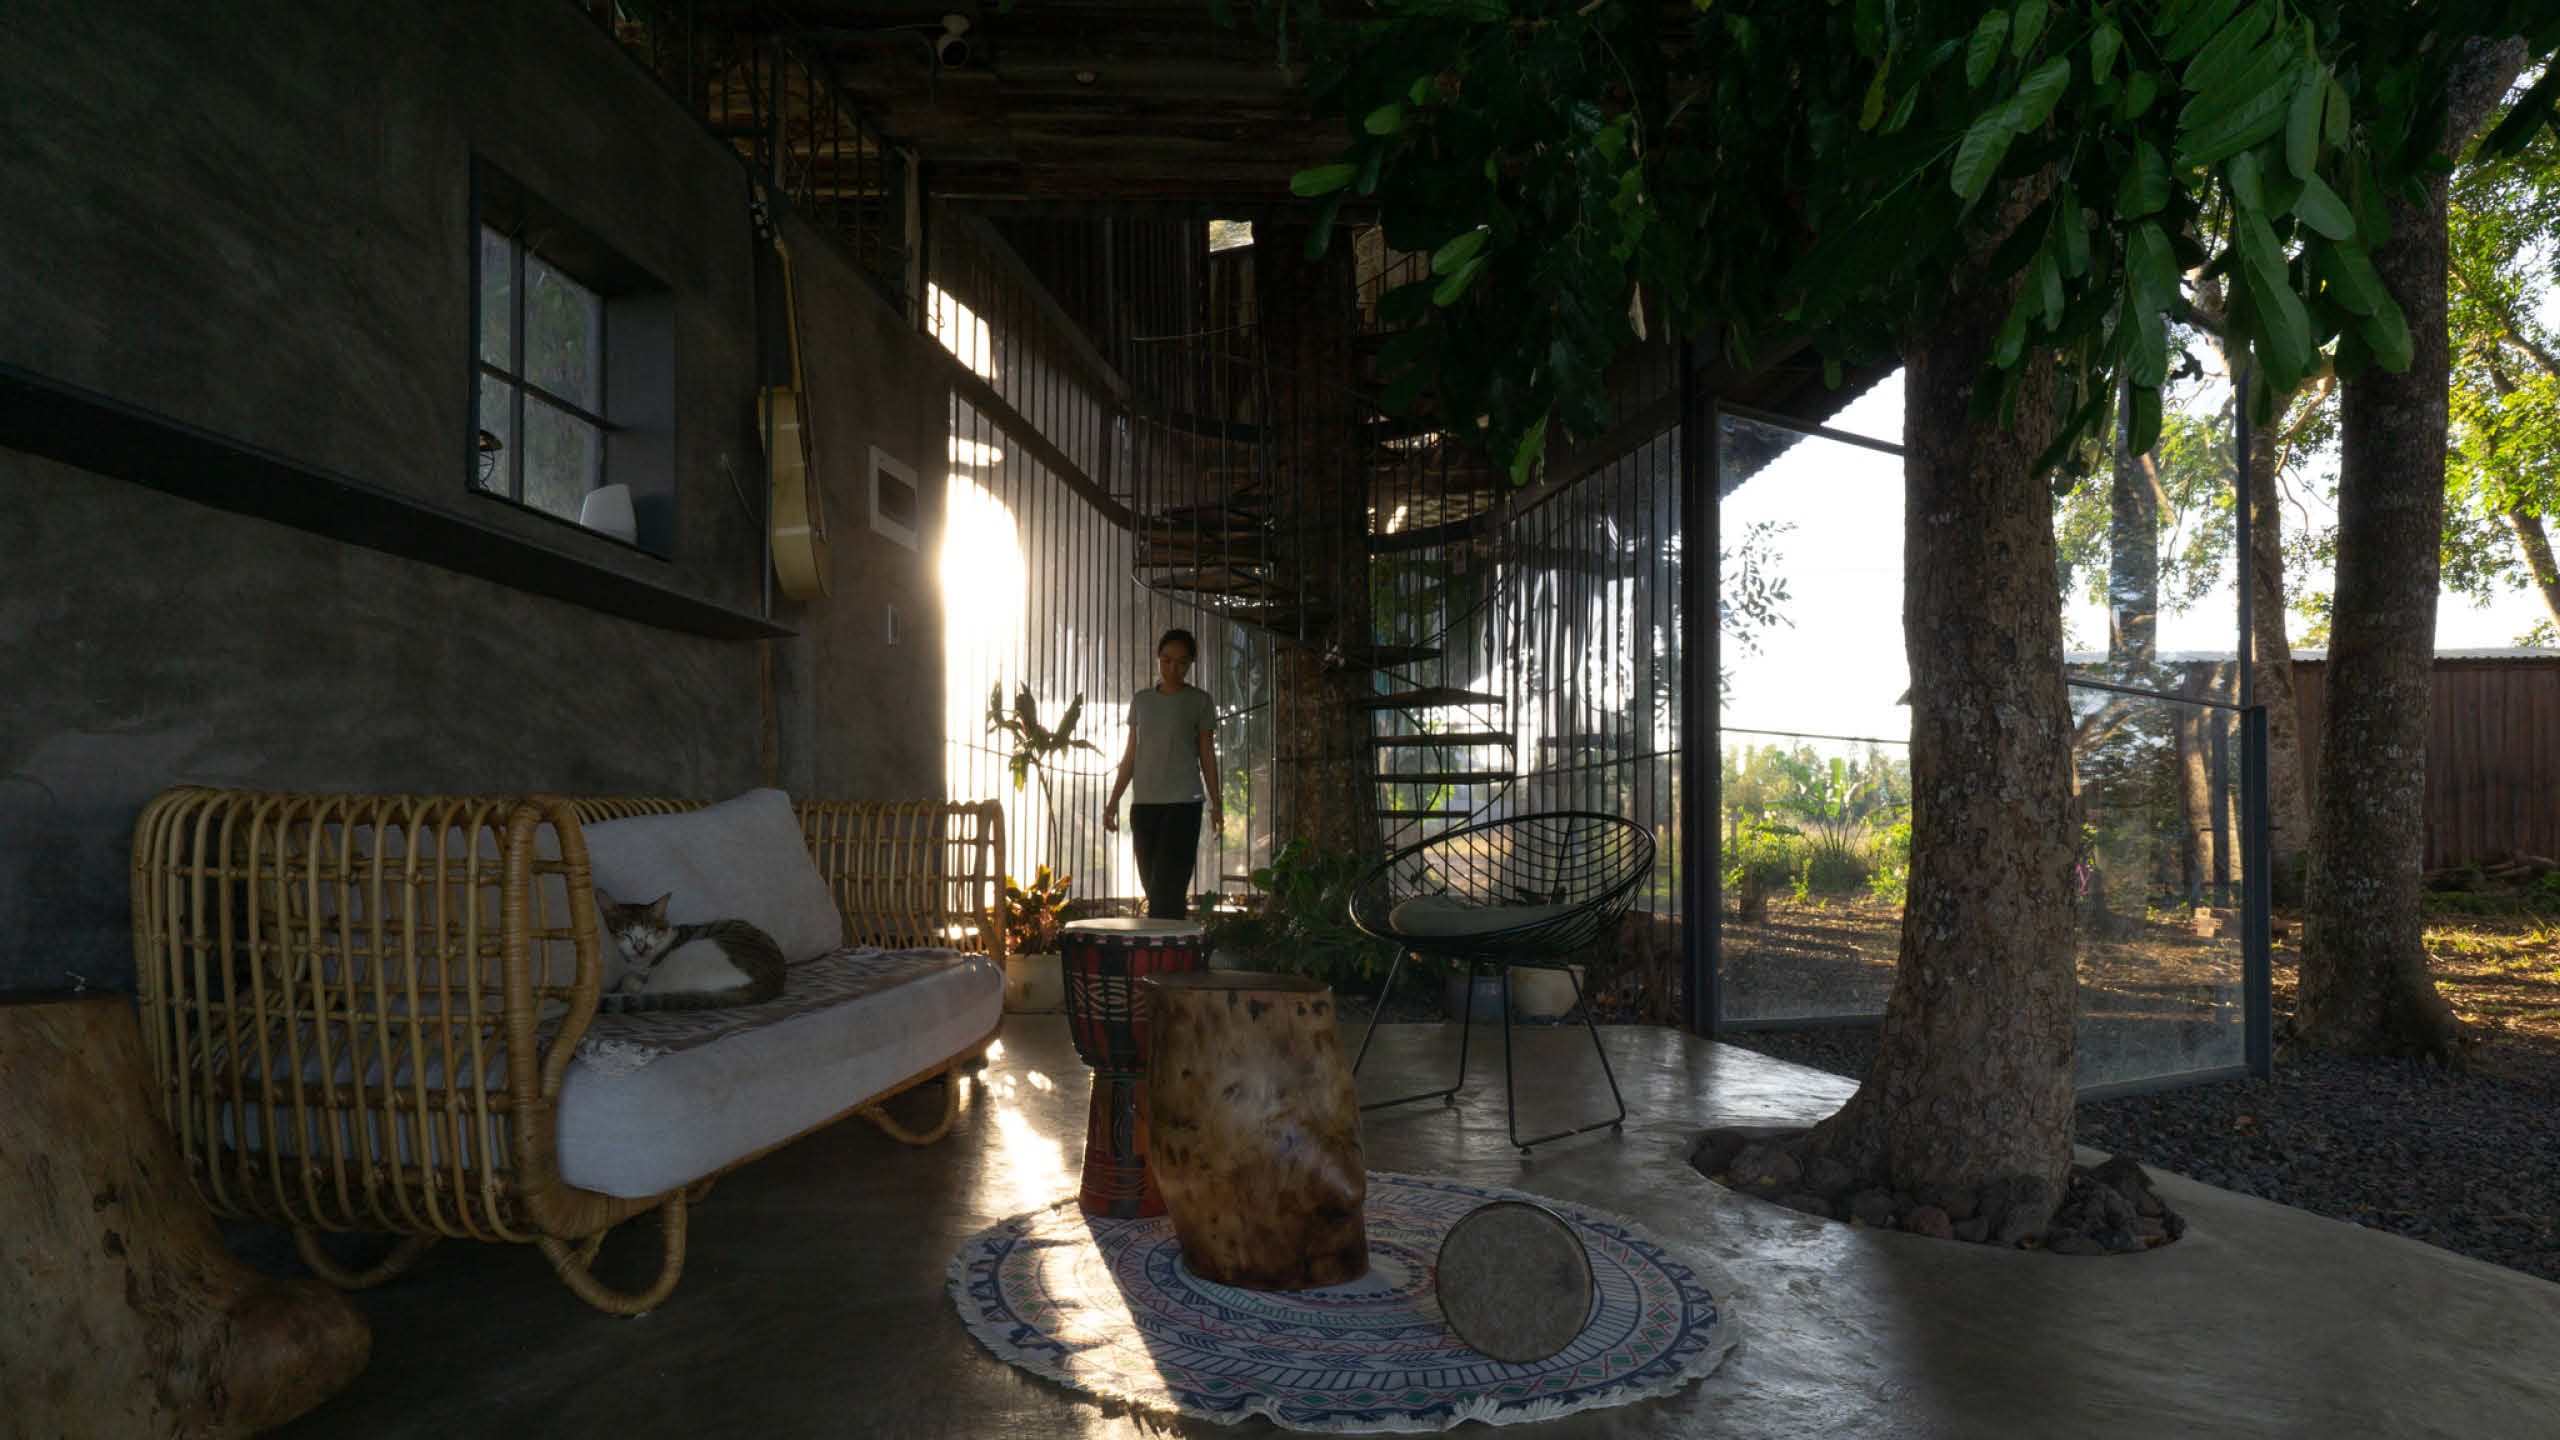 A woman next to a wooden spiral staircase walks into an open living room surrounded by nature.